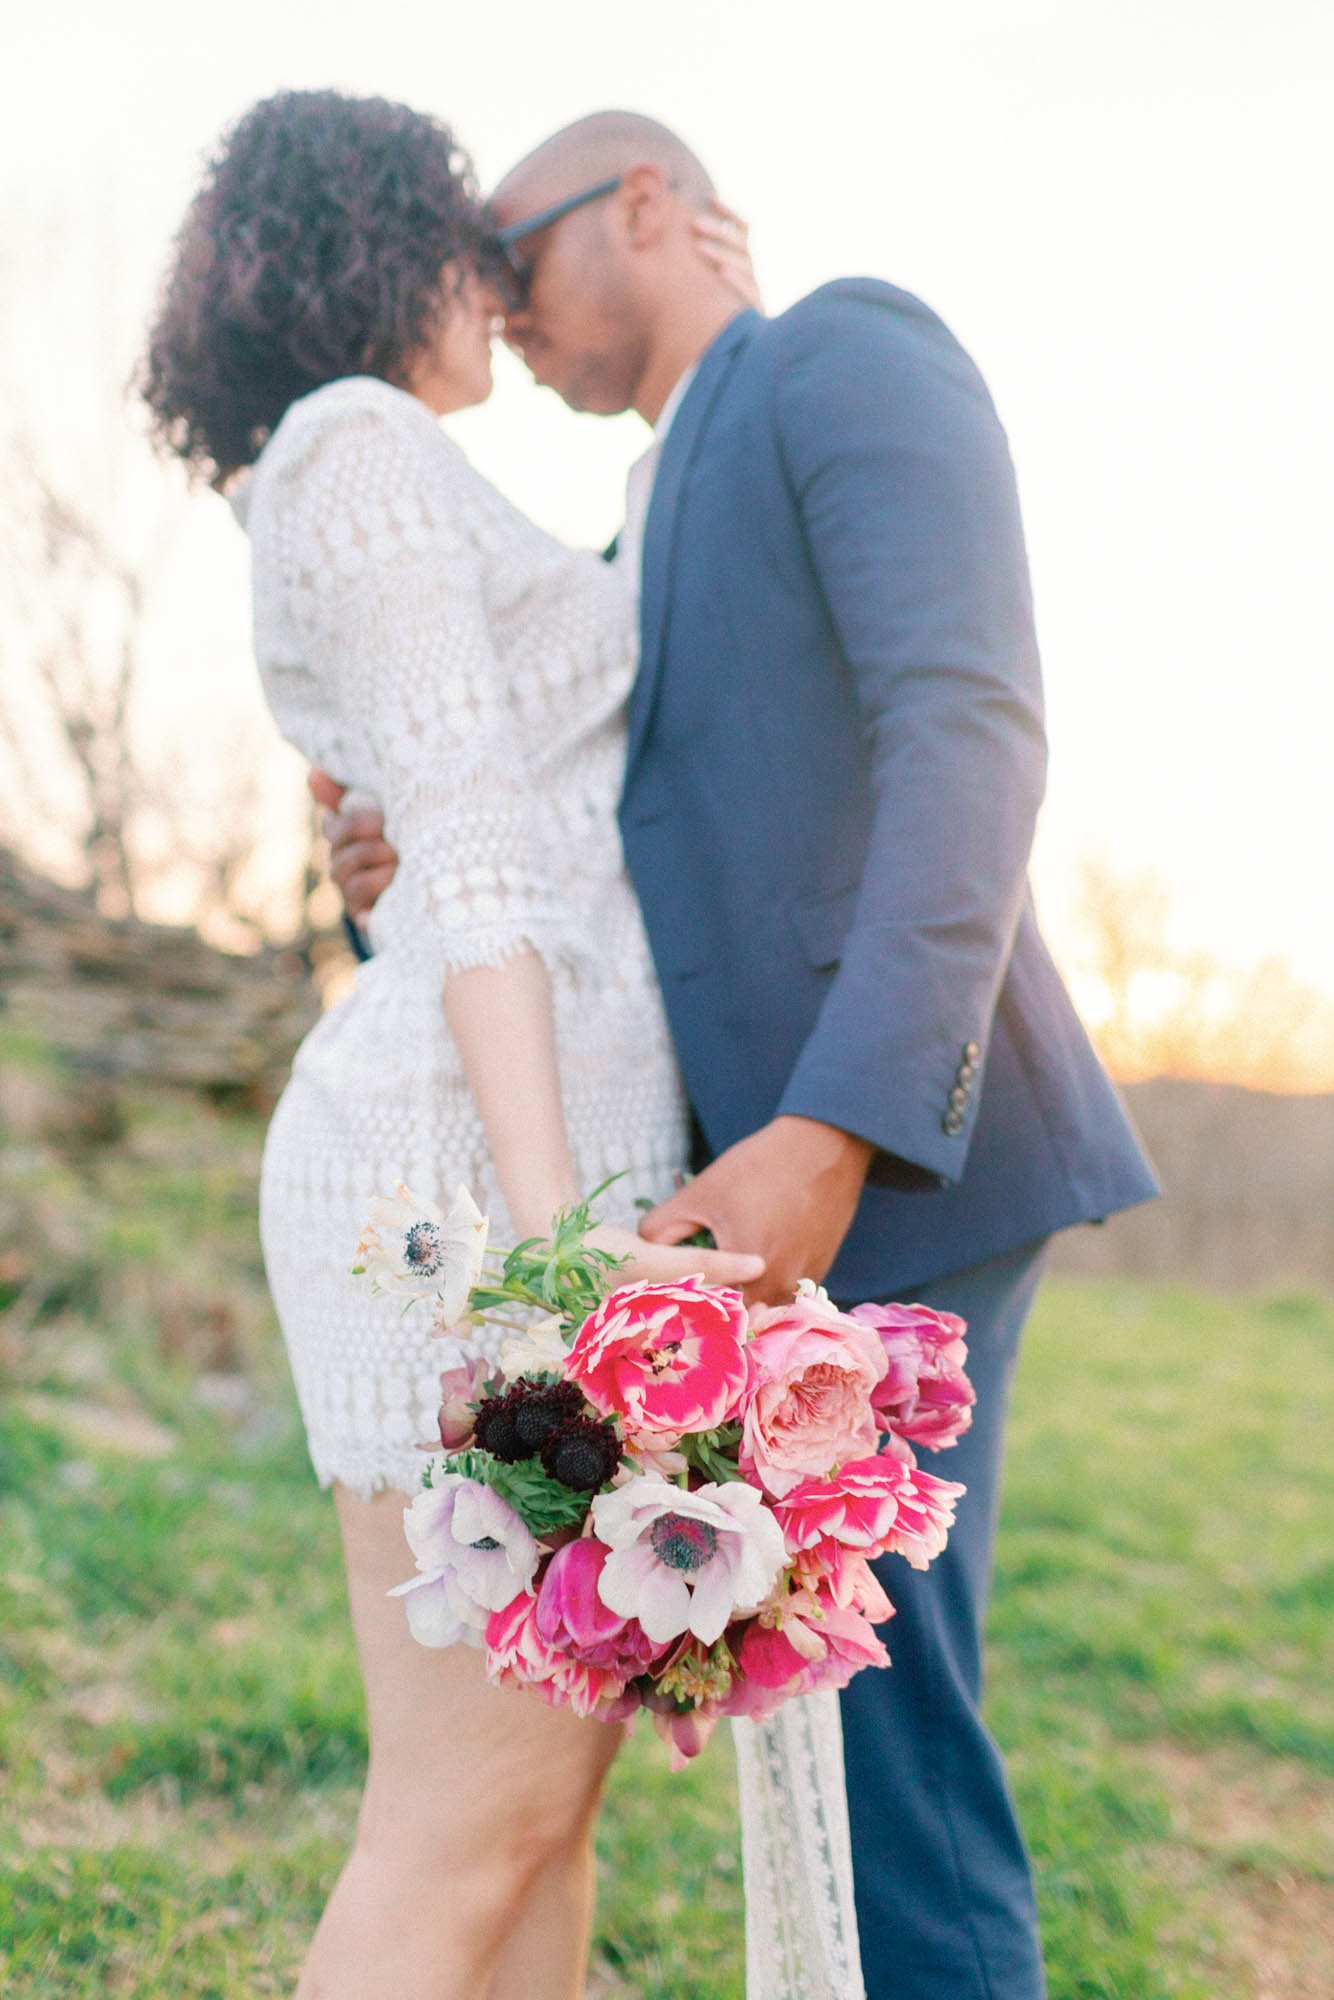 jessica-kovach-photography-inspiration-for-eloping-how-to-make-your-elopement-speical-and-unique-22.jpg